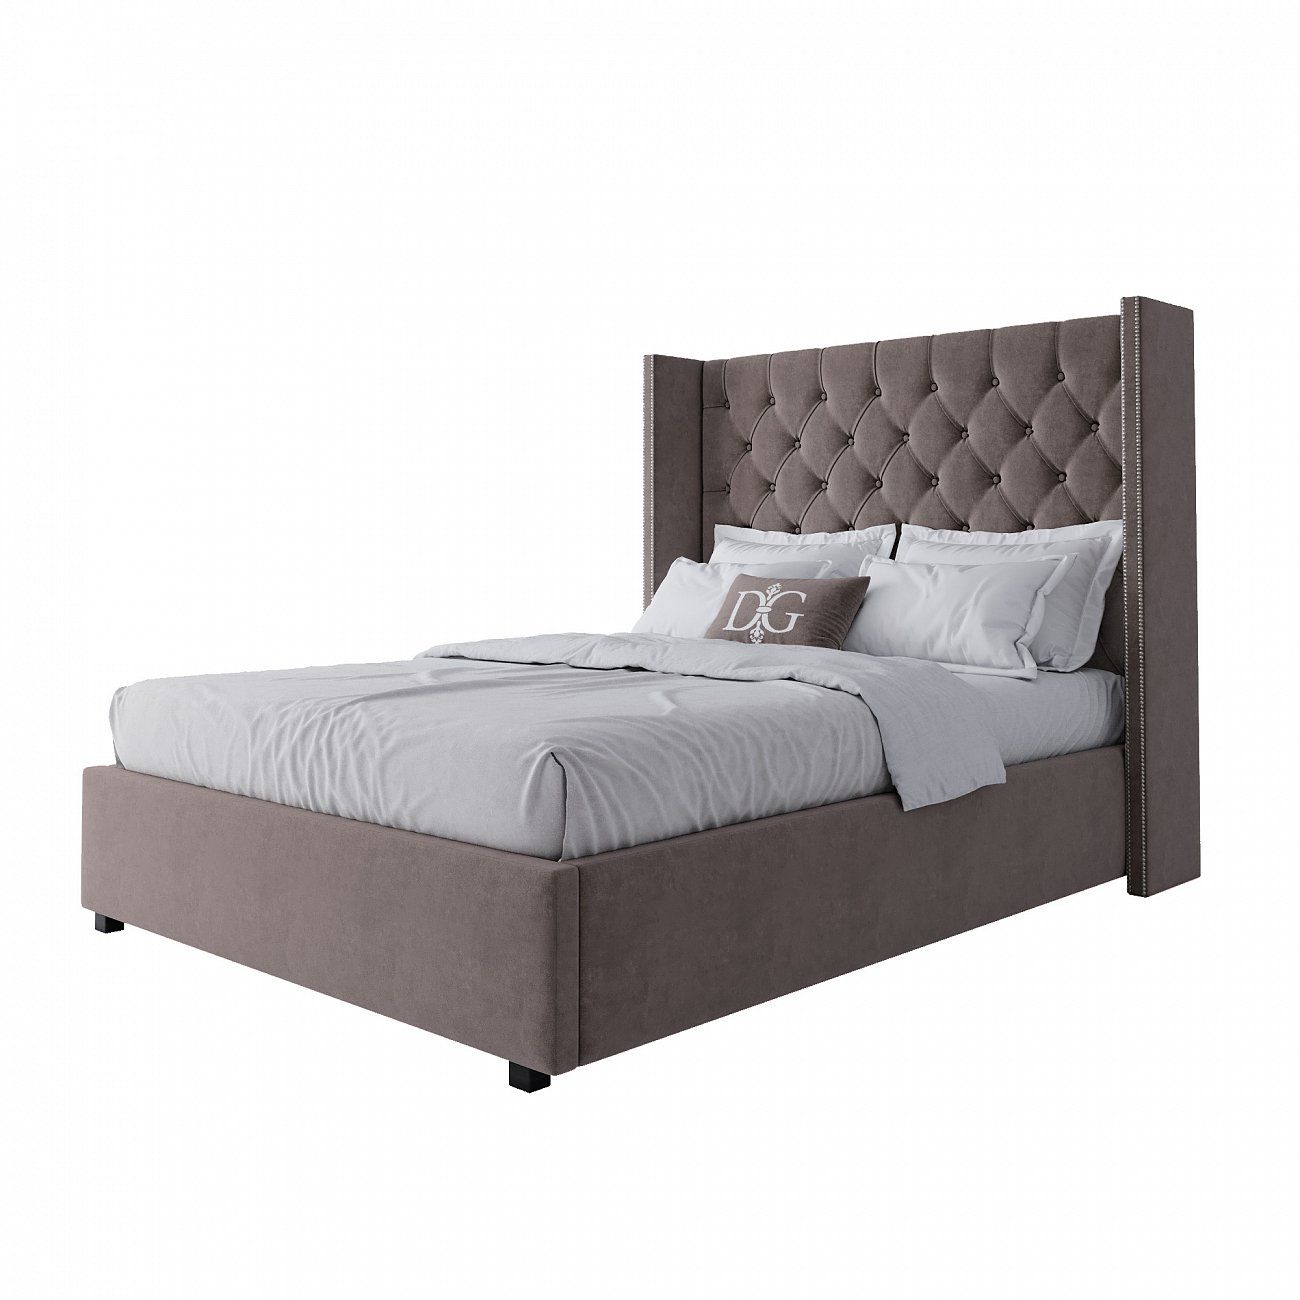 Semi-double teenage bed with carnations 140x200 cm gray-brown Wing